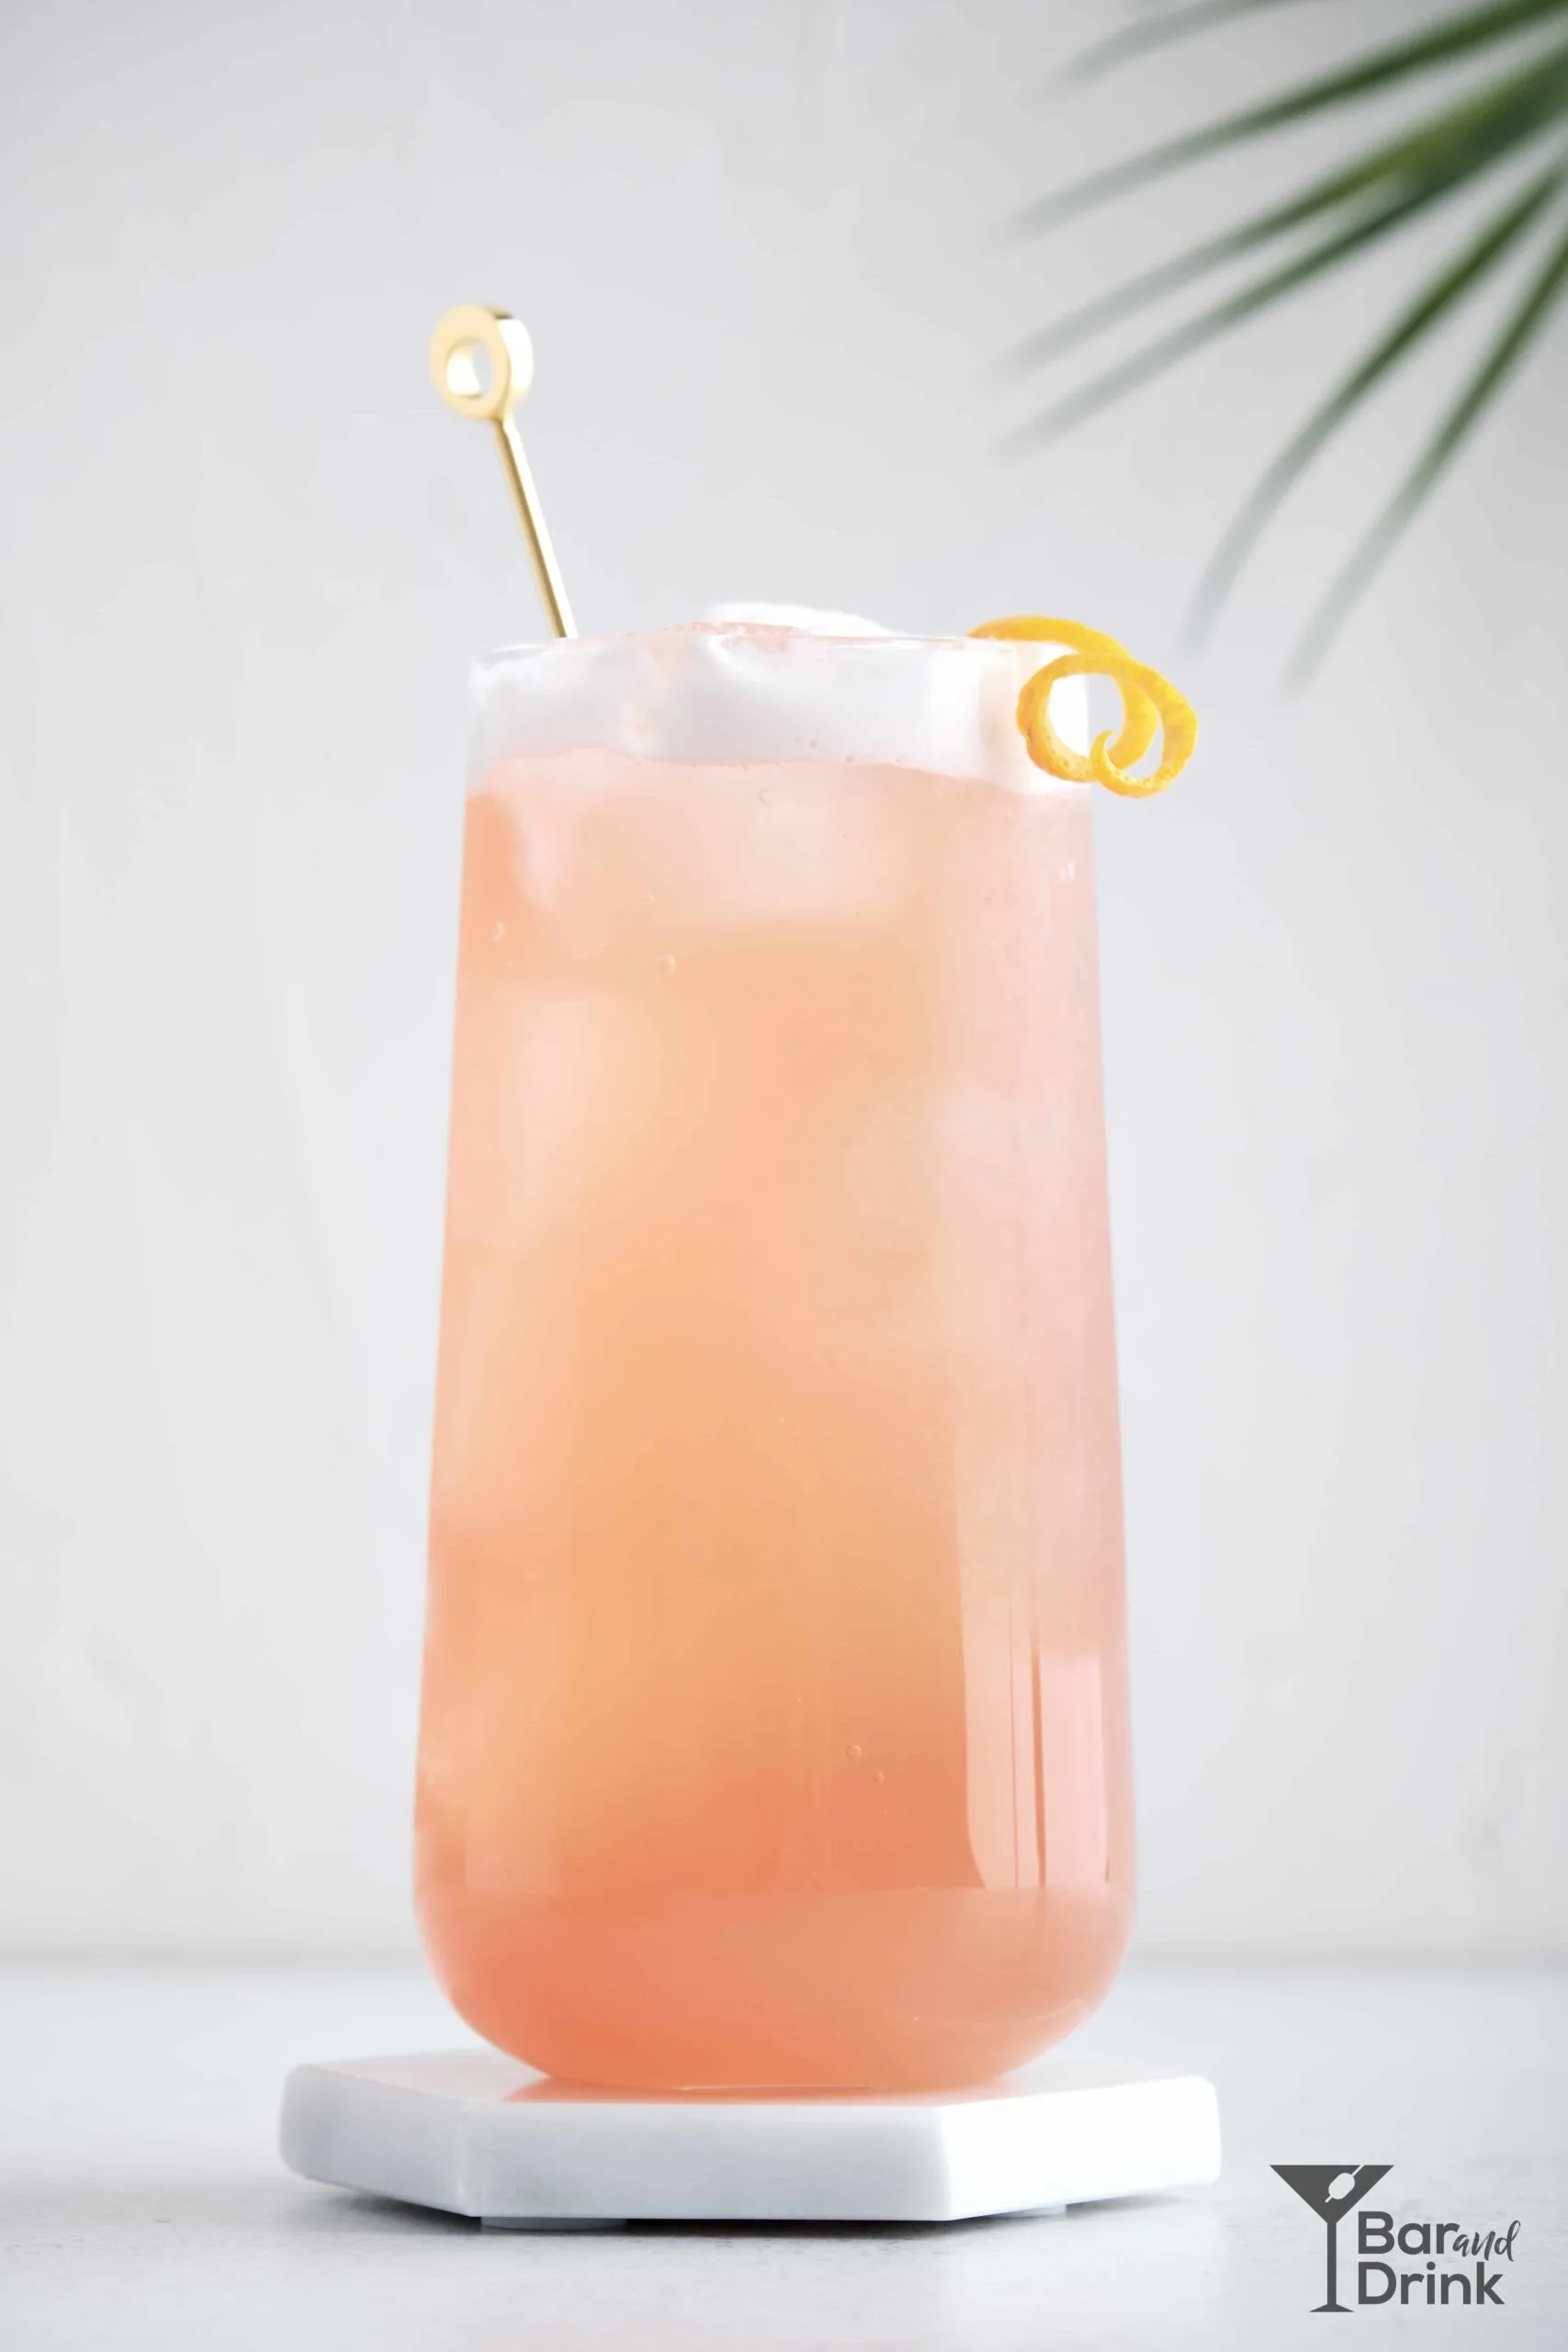 2. Panty Dropper Cocktail Variations